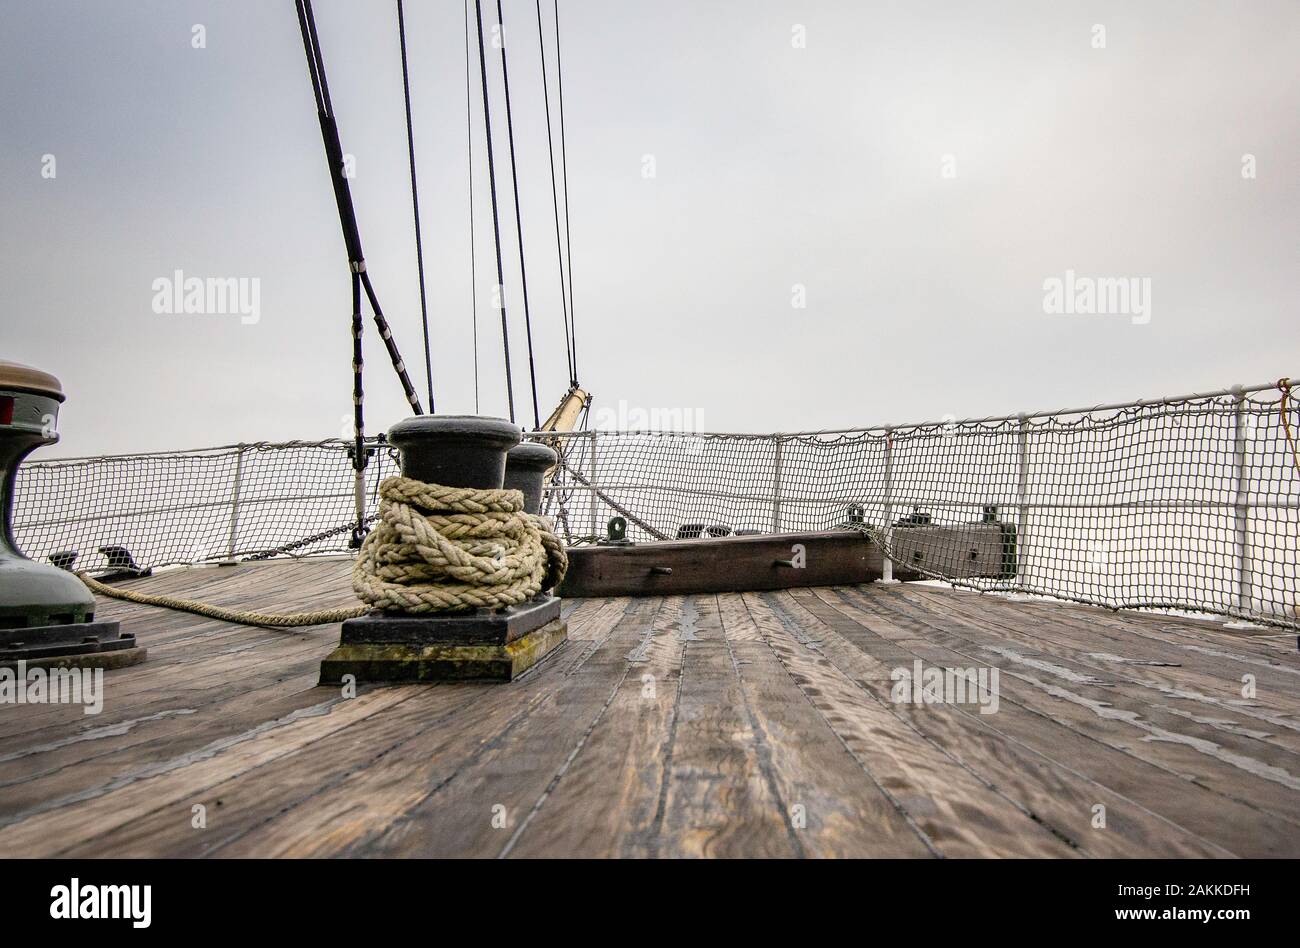 Deck of an Old Vintage Wooden Fishing Boat with Capstan Stock